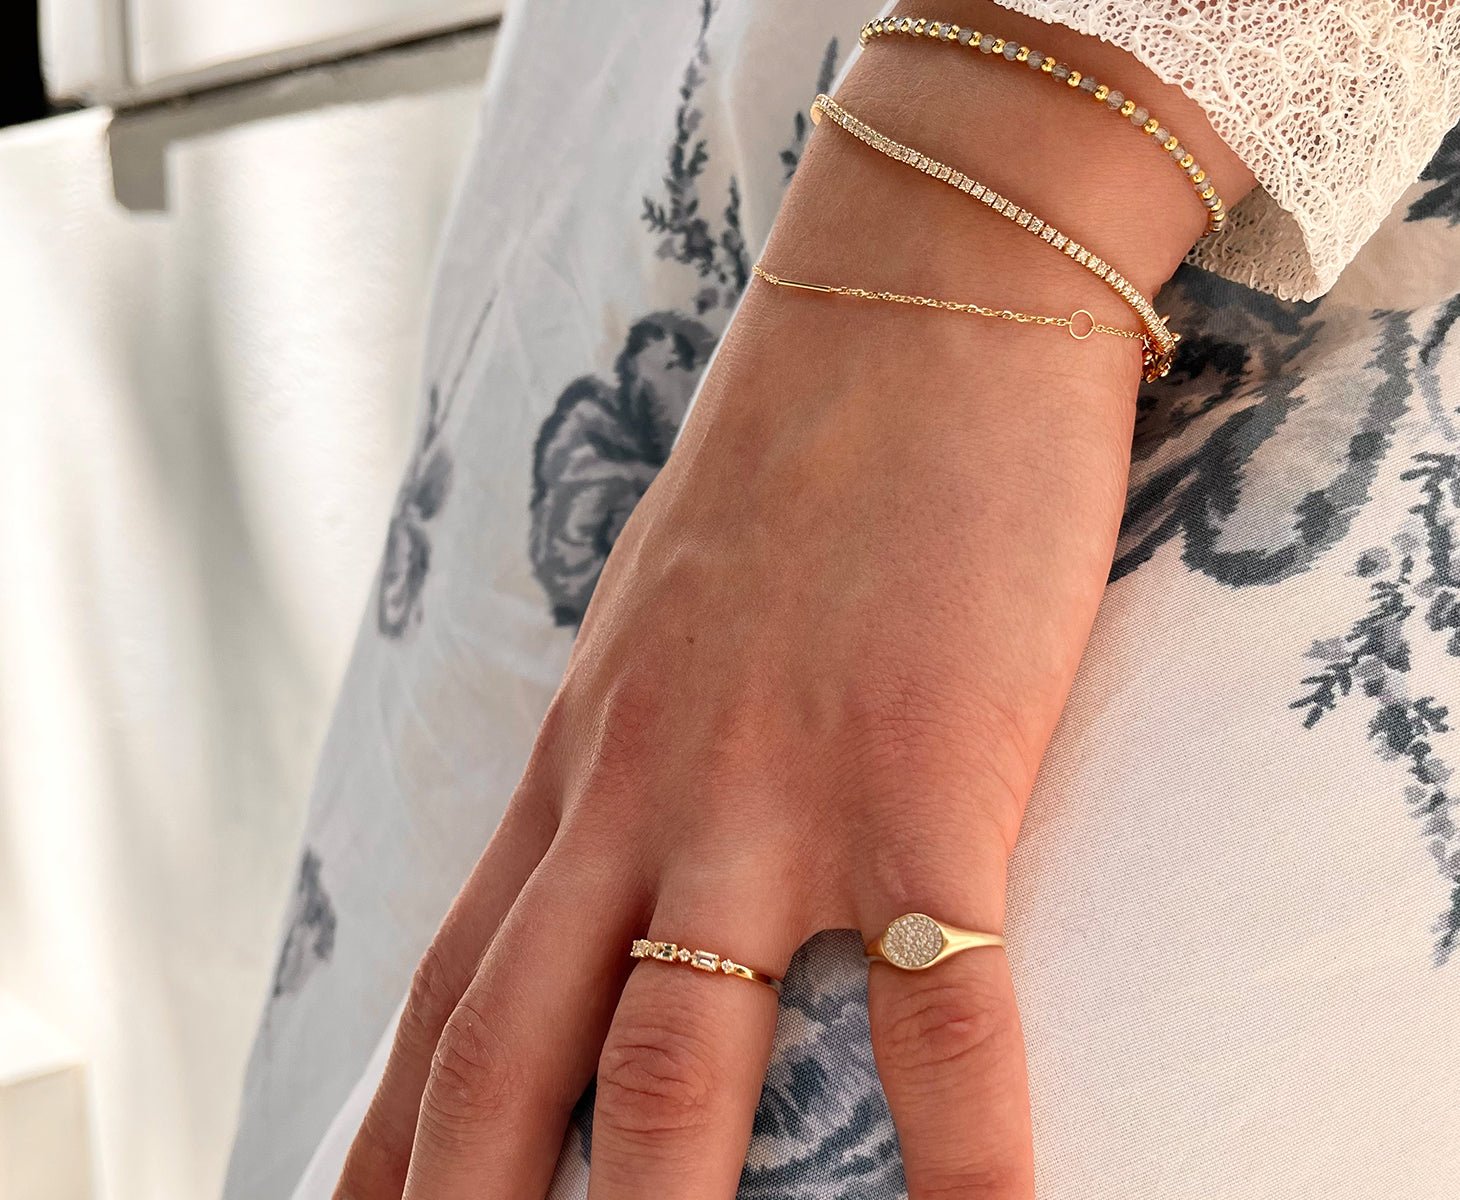 Woman wearing 14k solid gold rings and bracelets.